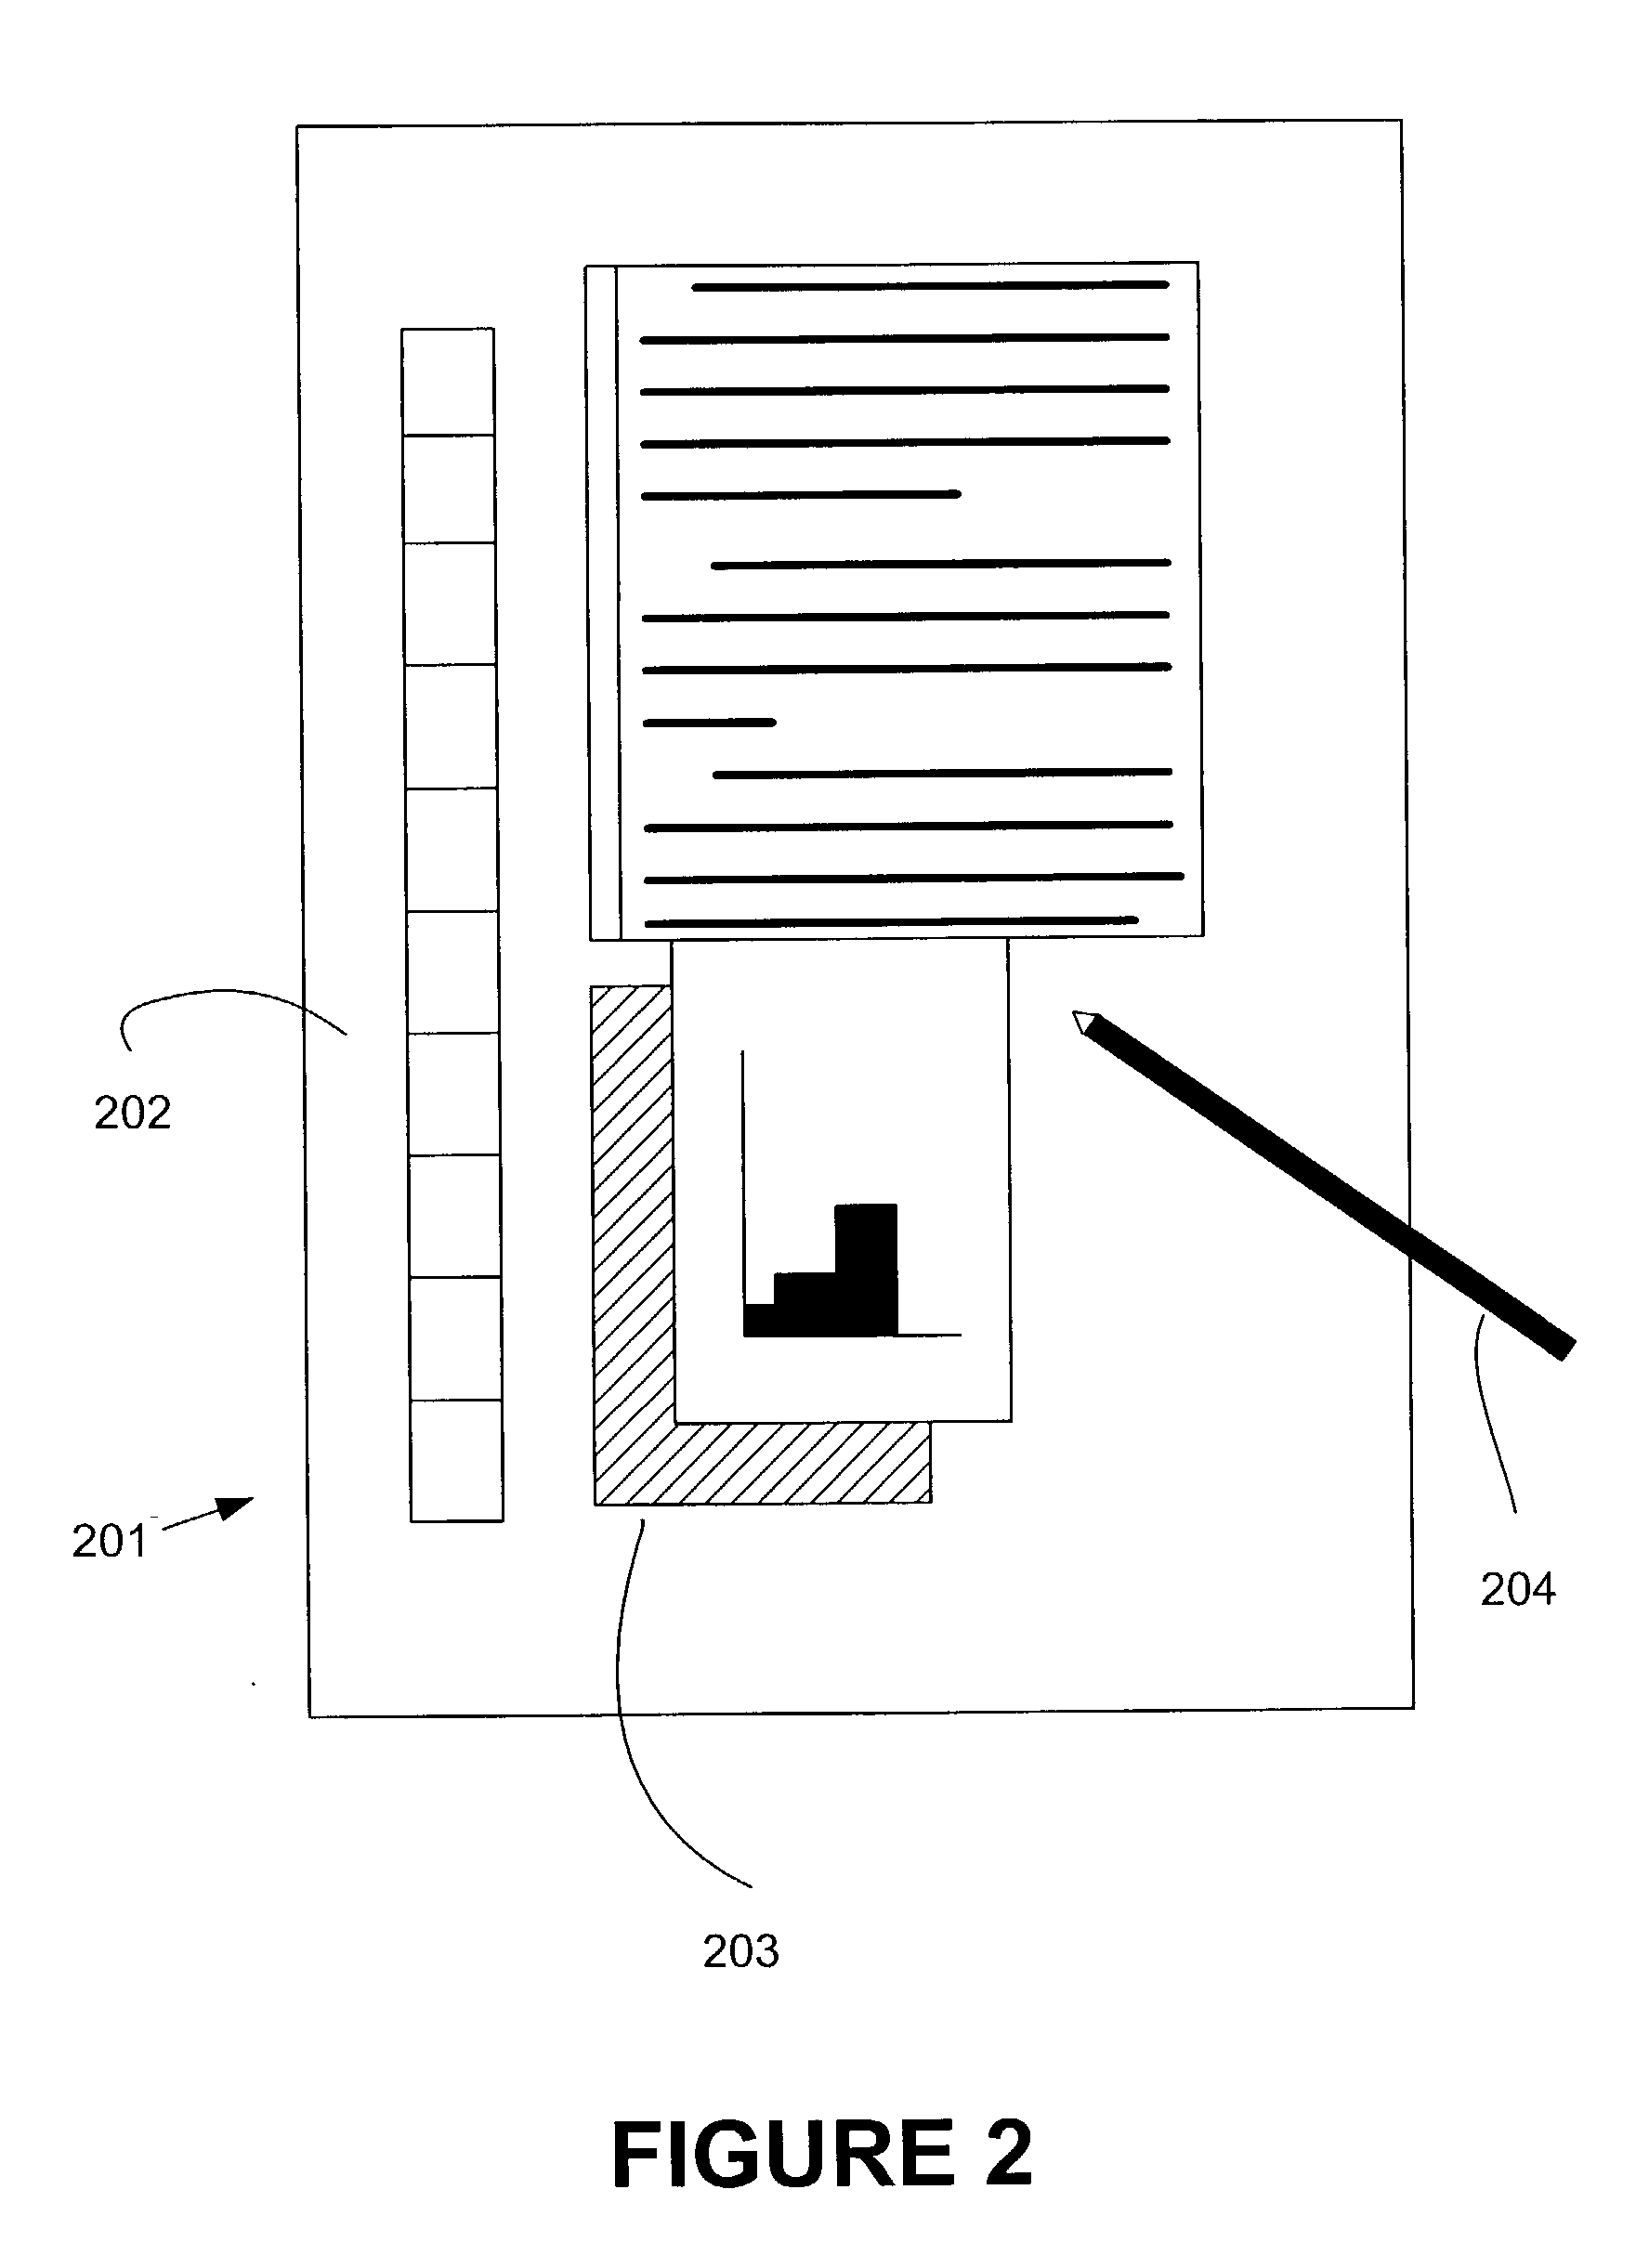 Entry and editing of electronic ink